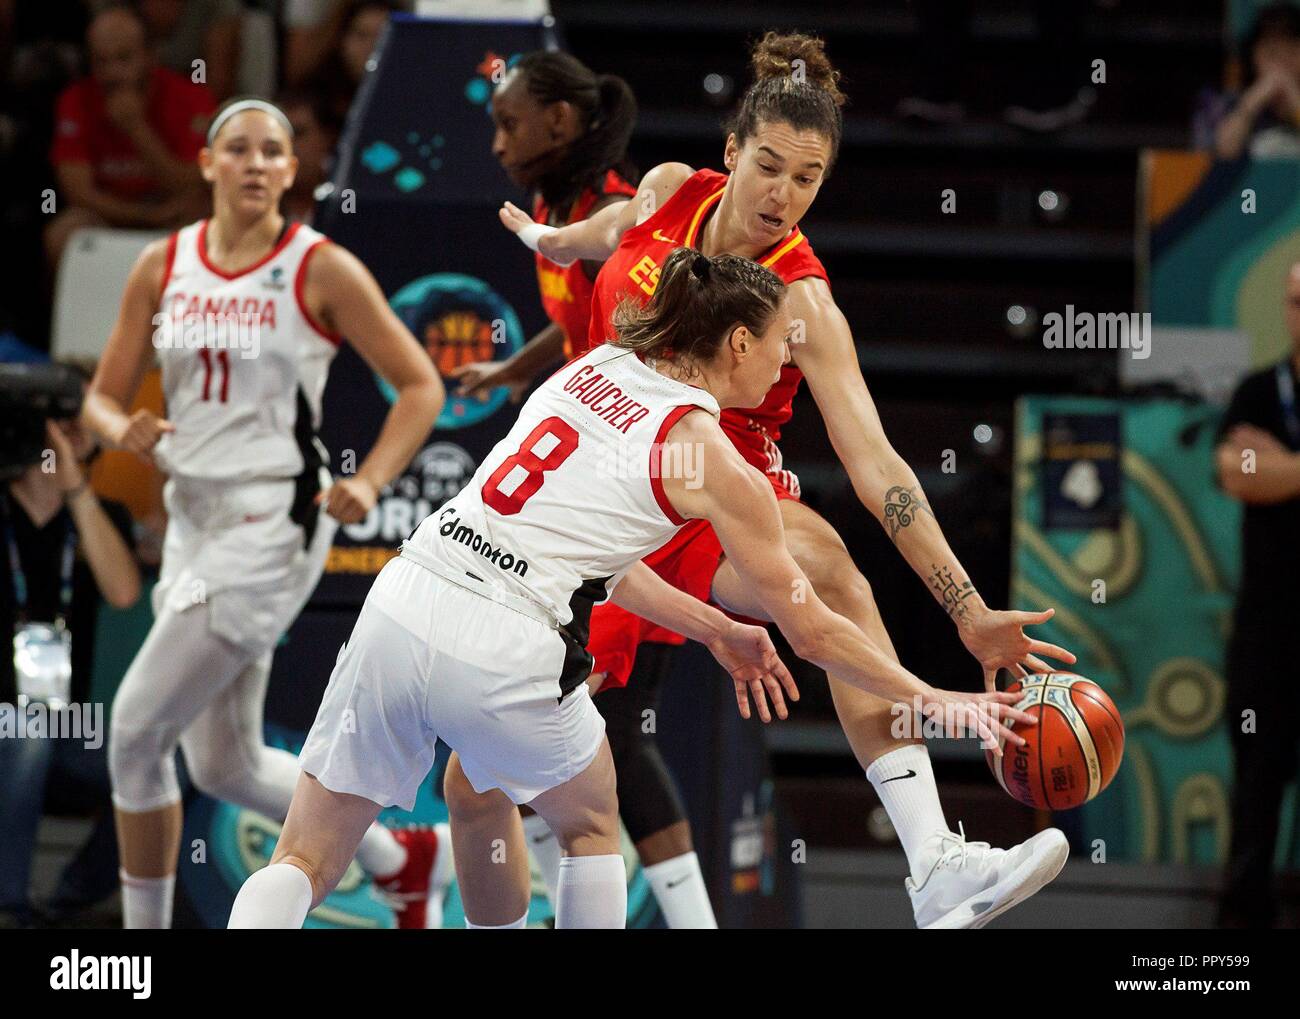 Spain's National Women's basketball team player Laura Nicholls in action  against Canada's Kim Gaucher, during their 2018 FIBA Women's Basketball  World Cup quarter finals match in Tenerife, Canary Islands, Spain, 28  September